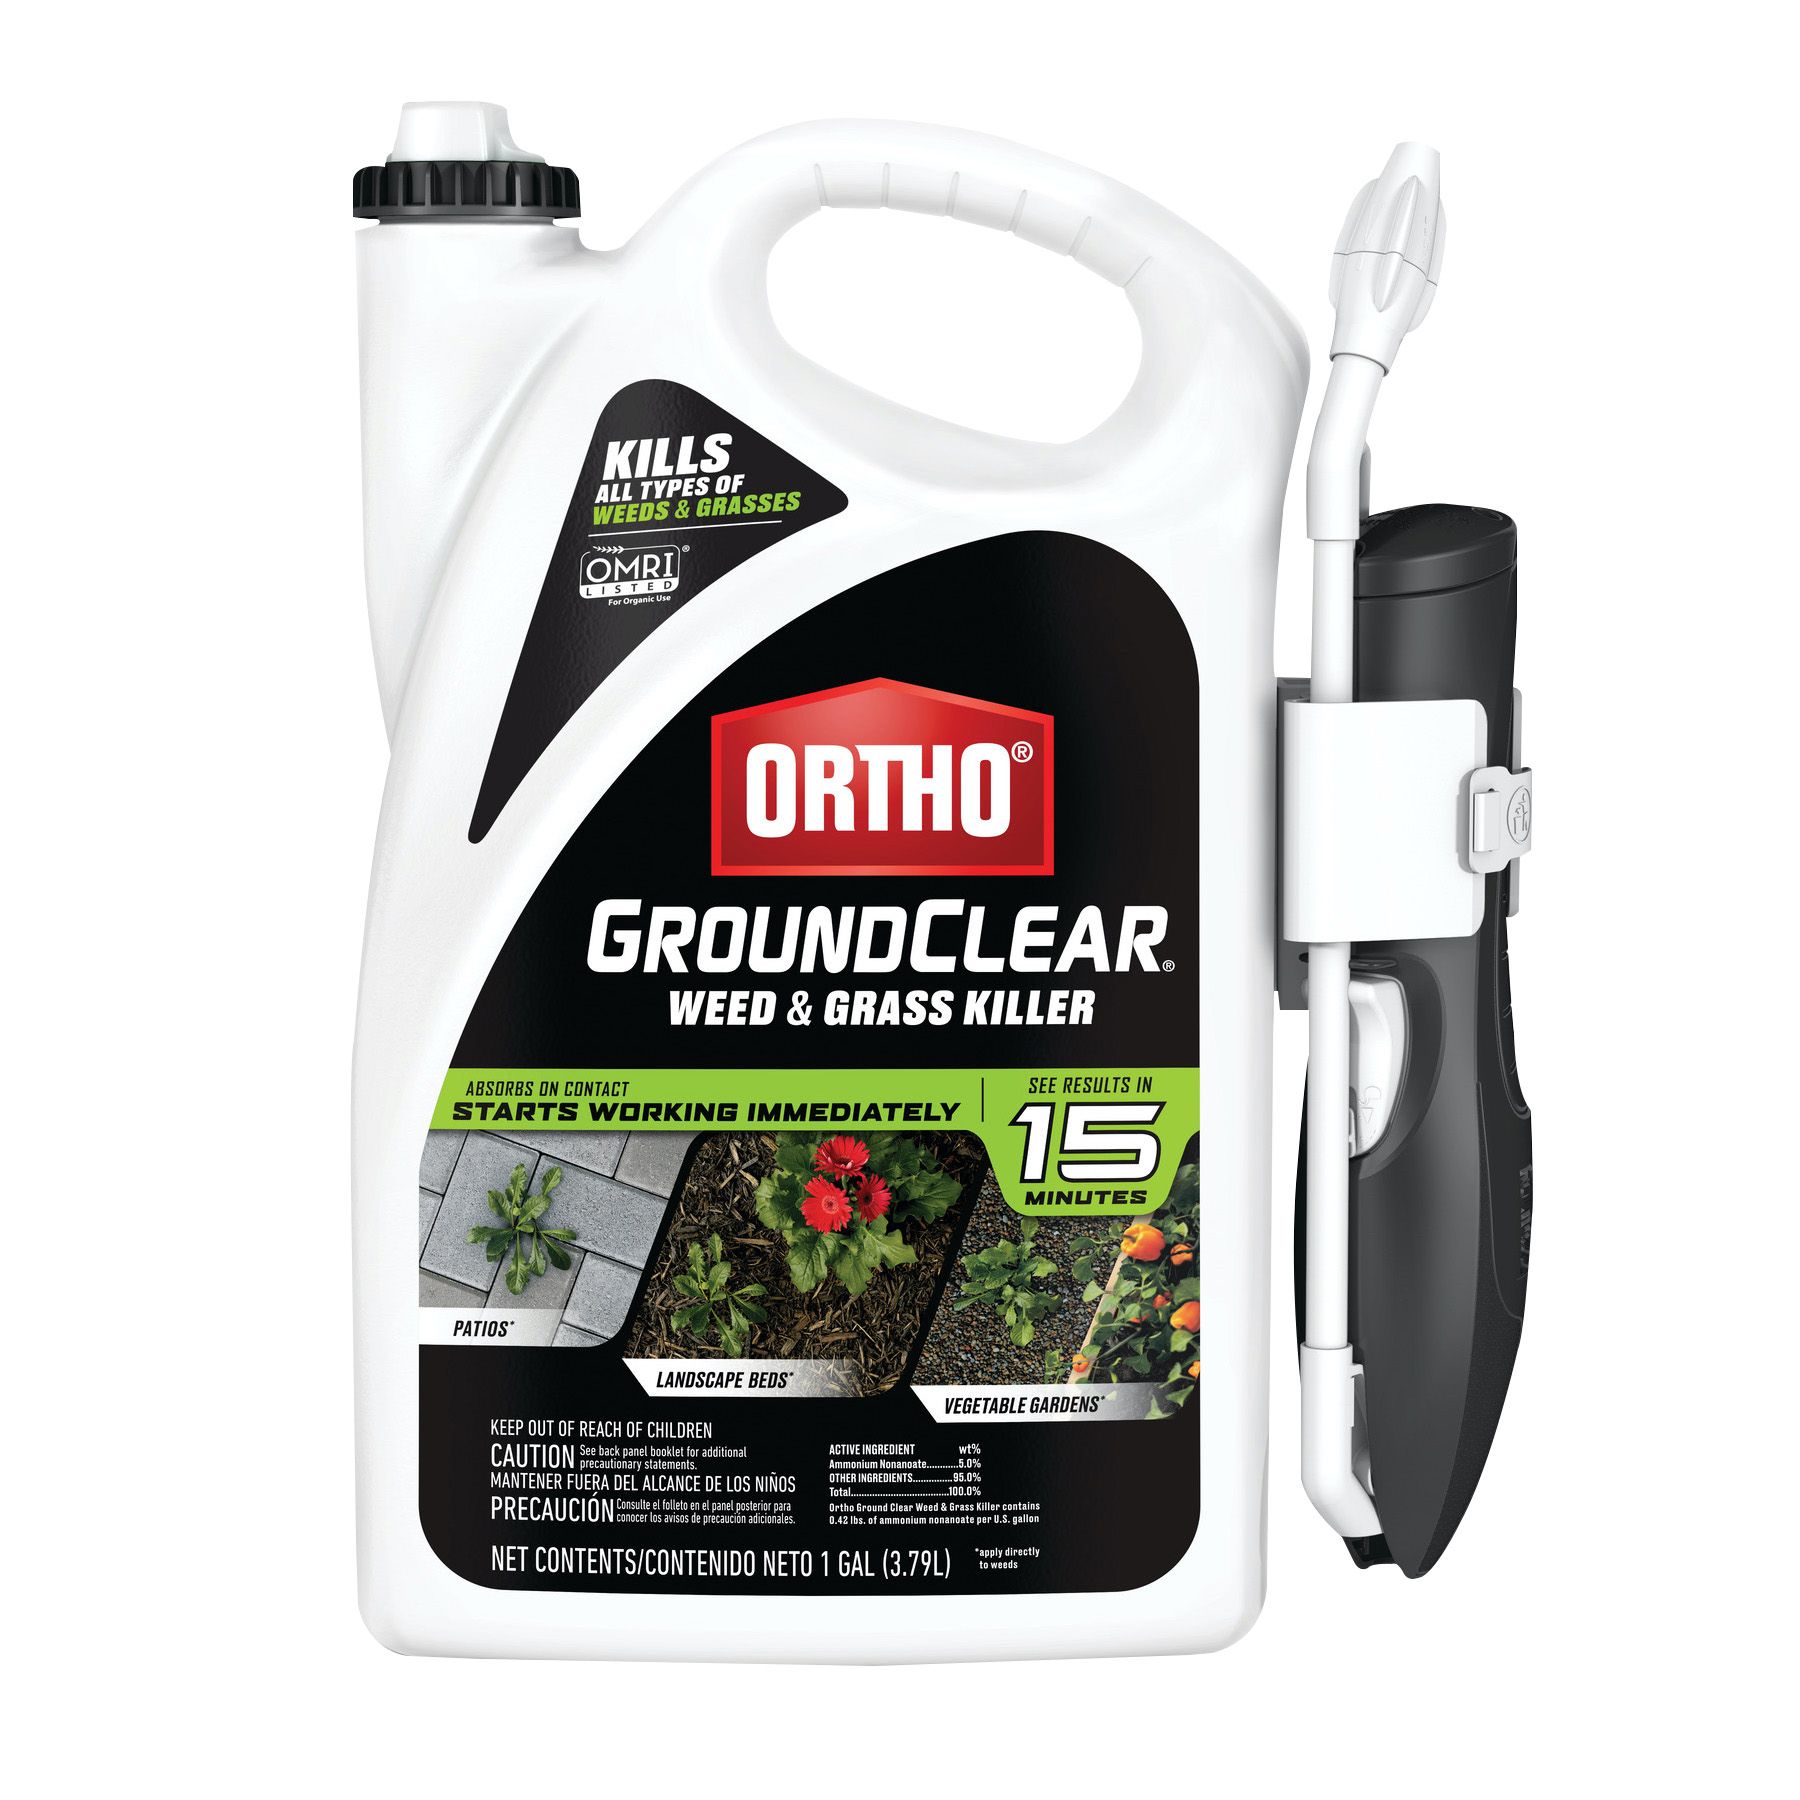 Ortho Groundclear Weed & Grass Killer, 1 gal.